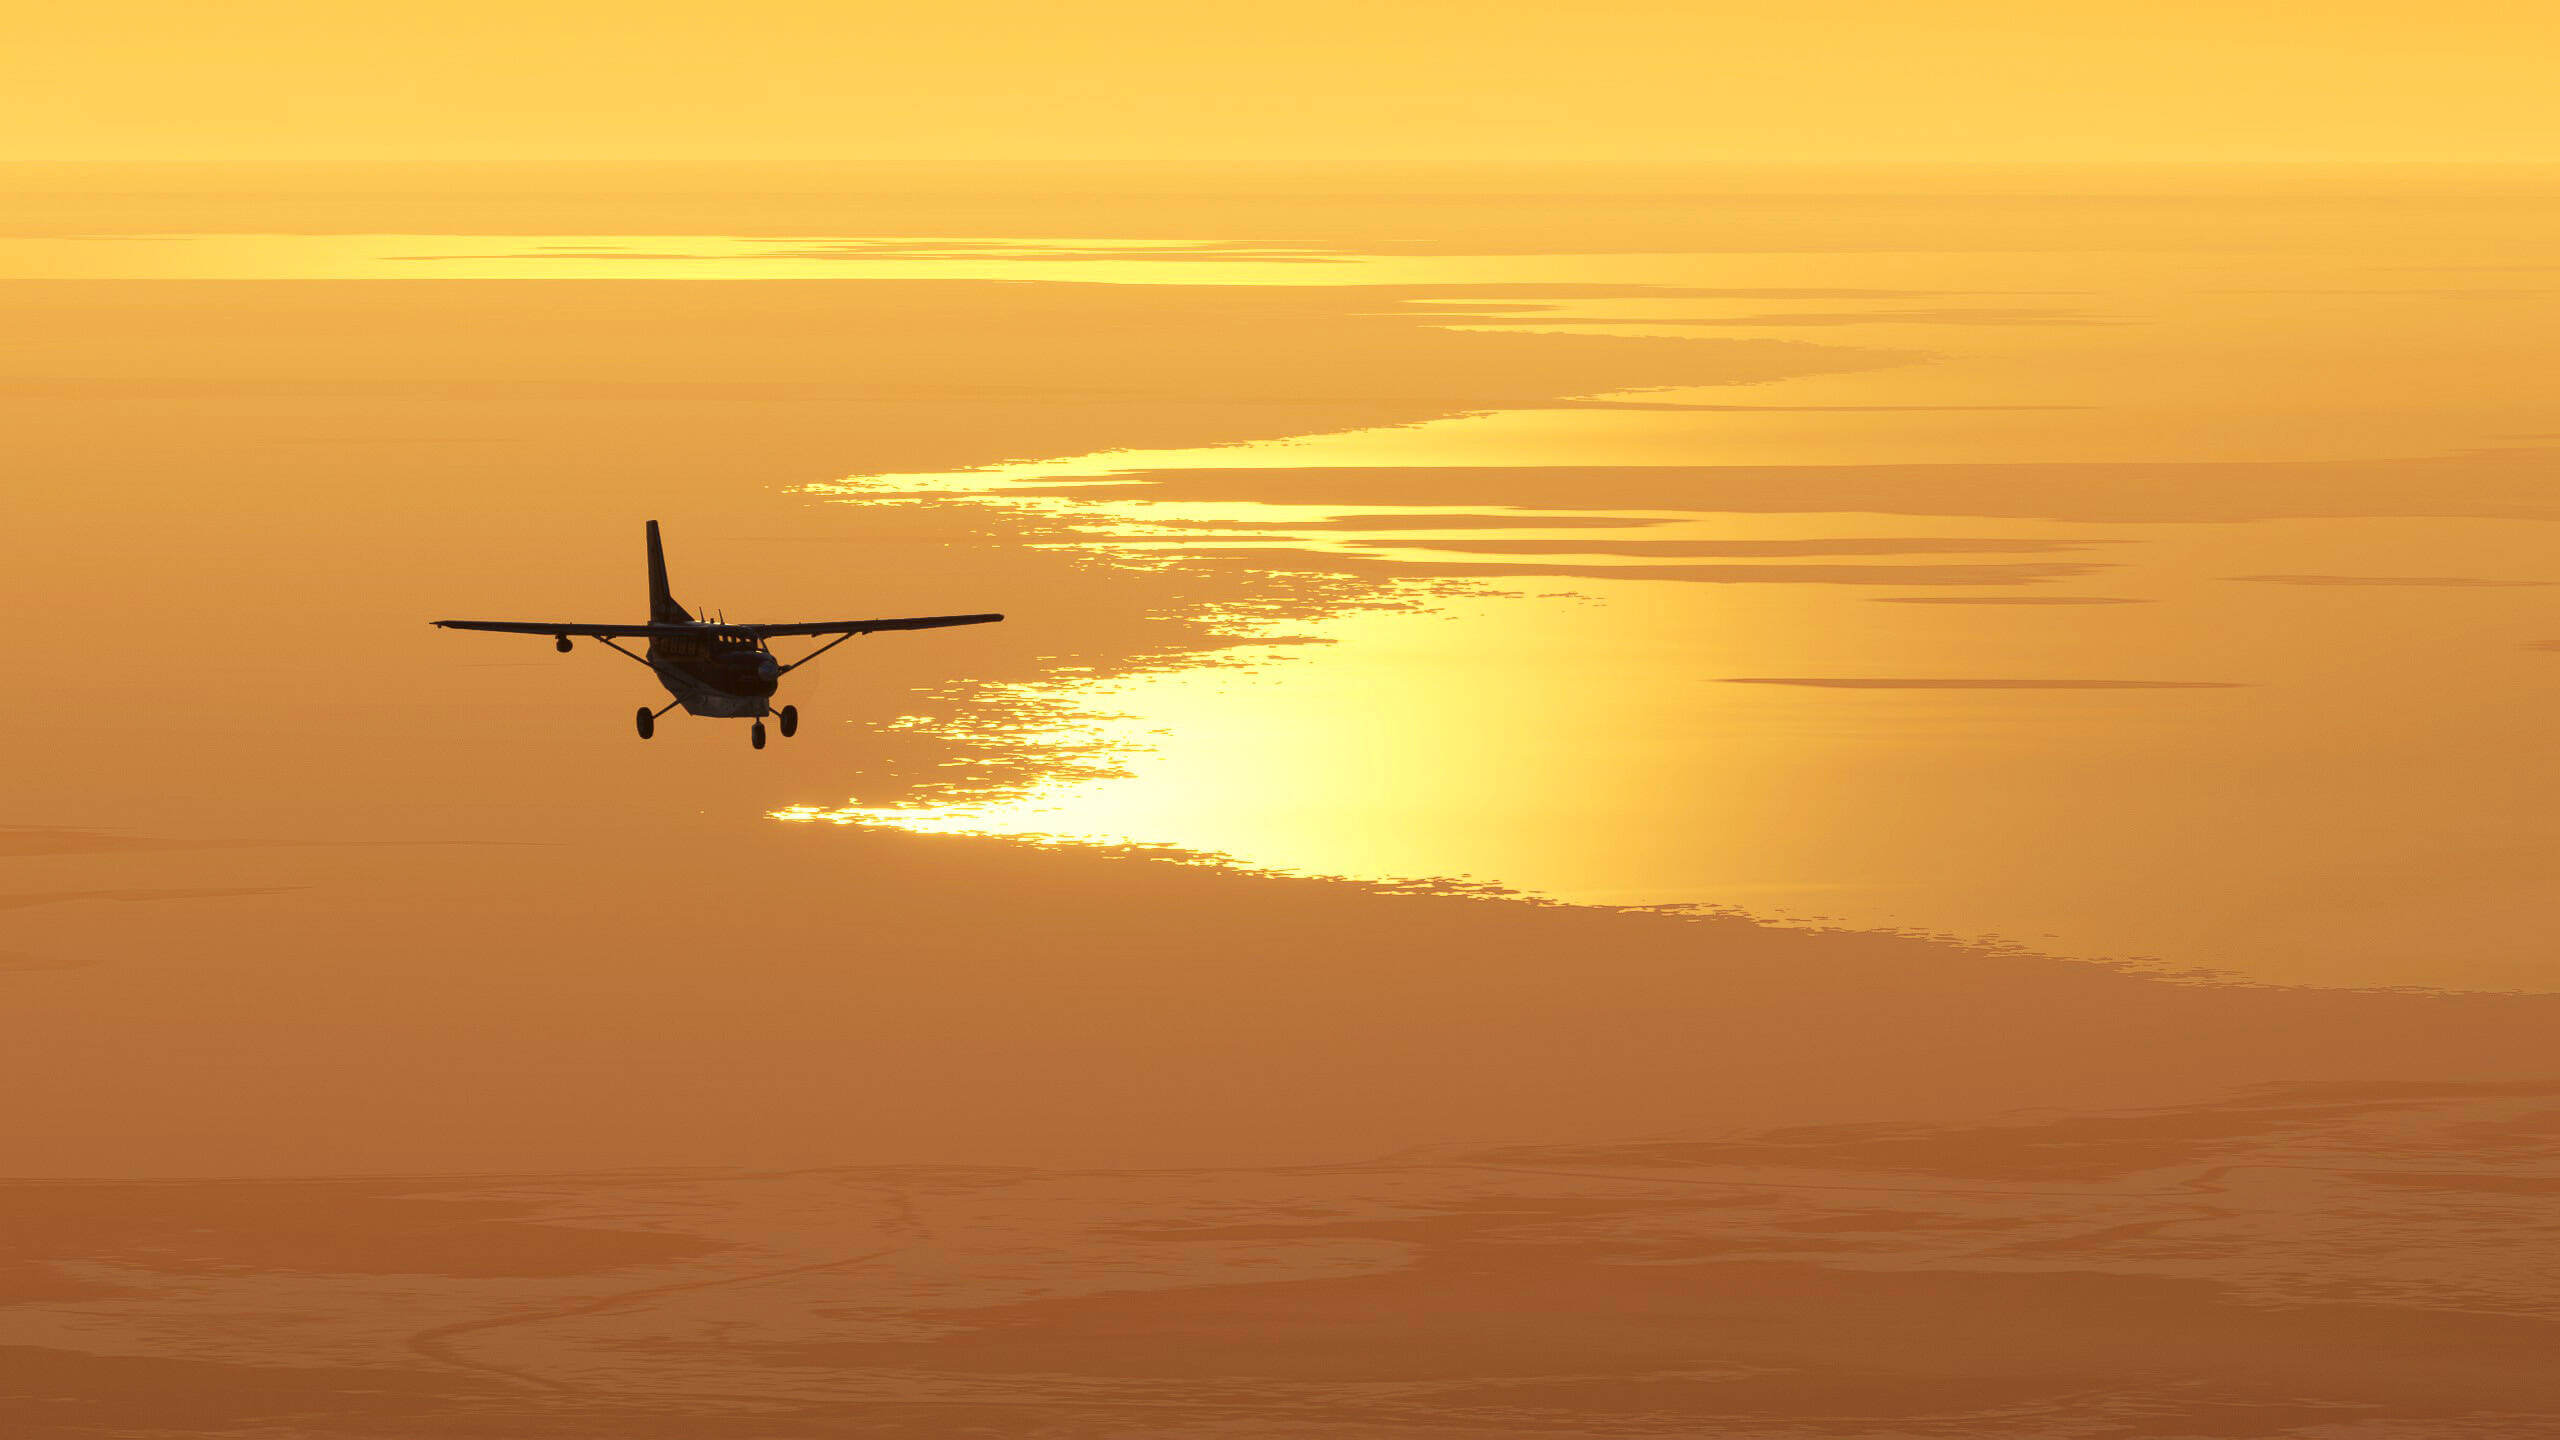 A plane is silhouetted as it flies towards the golden horizon, lit by the sunrise.